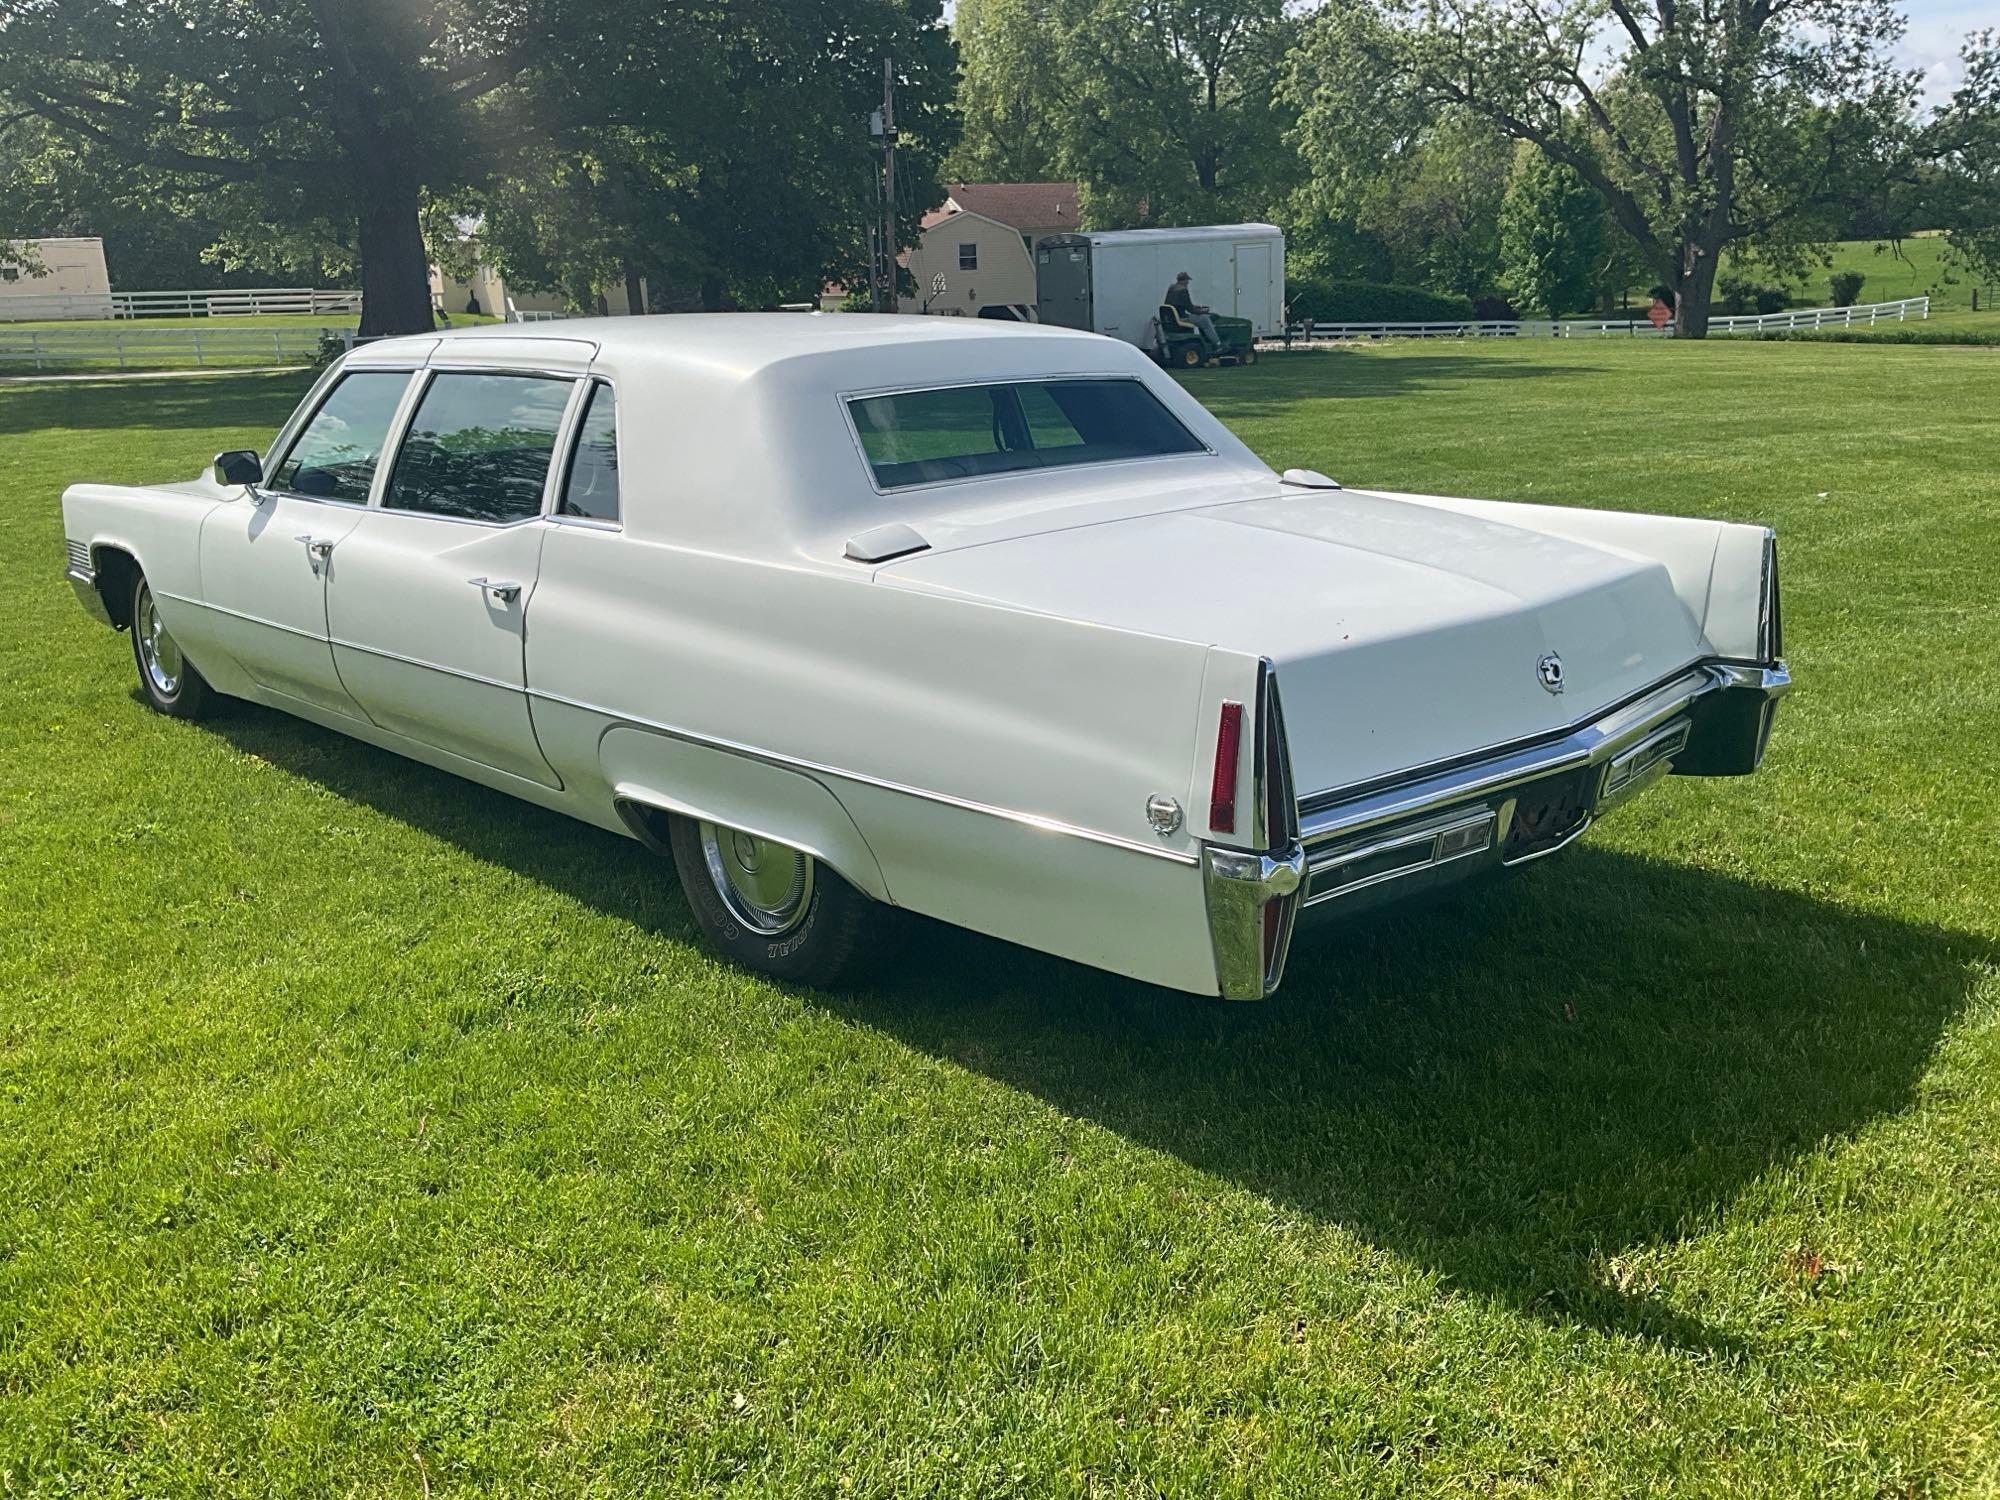 1970 Cadillac Fleetwood limousine, 473 V8, full power, jump seat, 43,835 actual miles